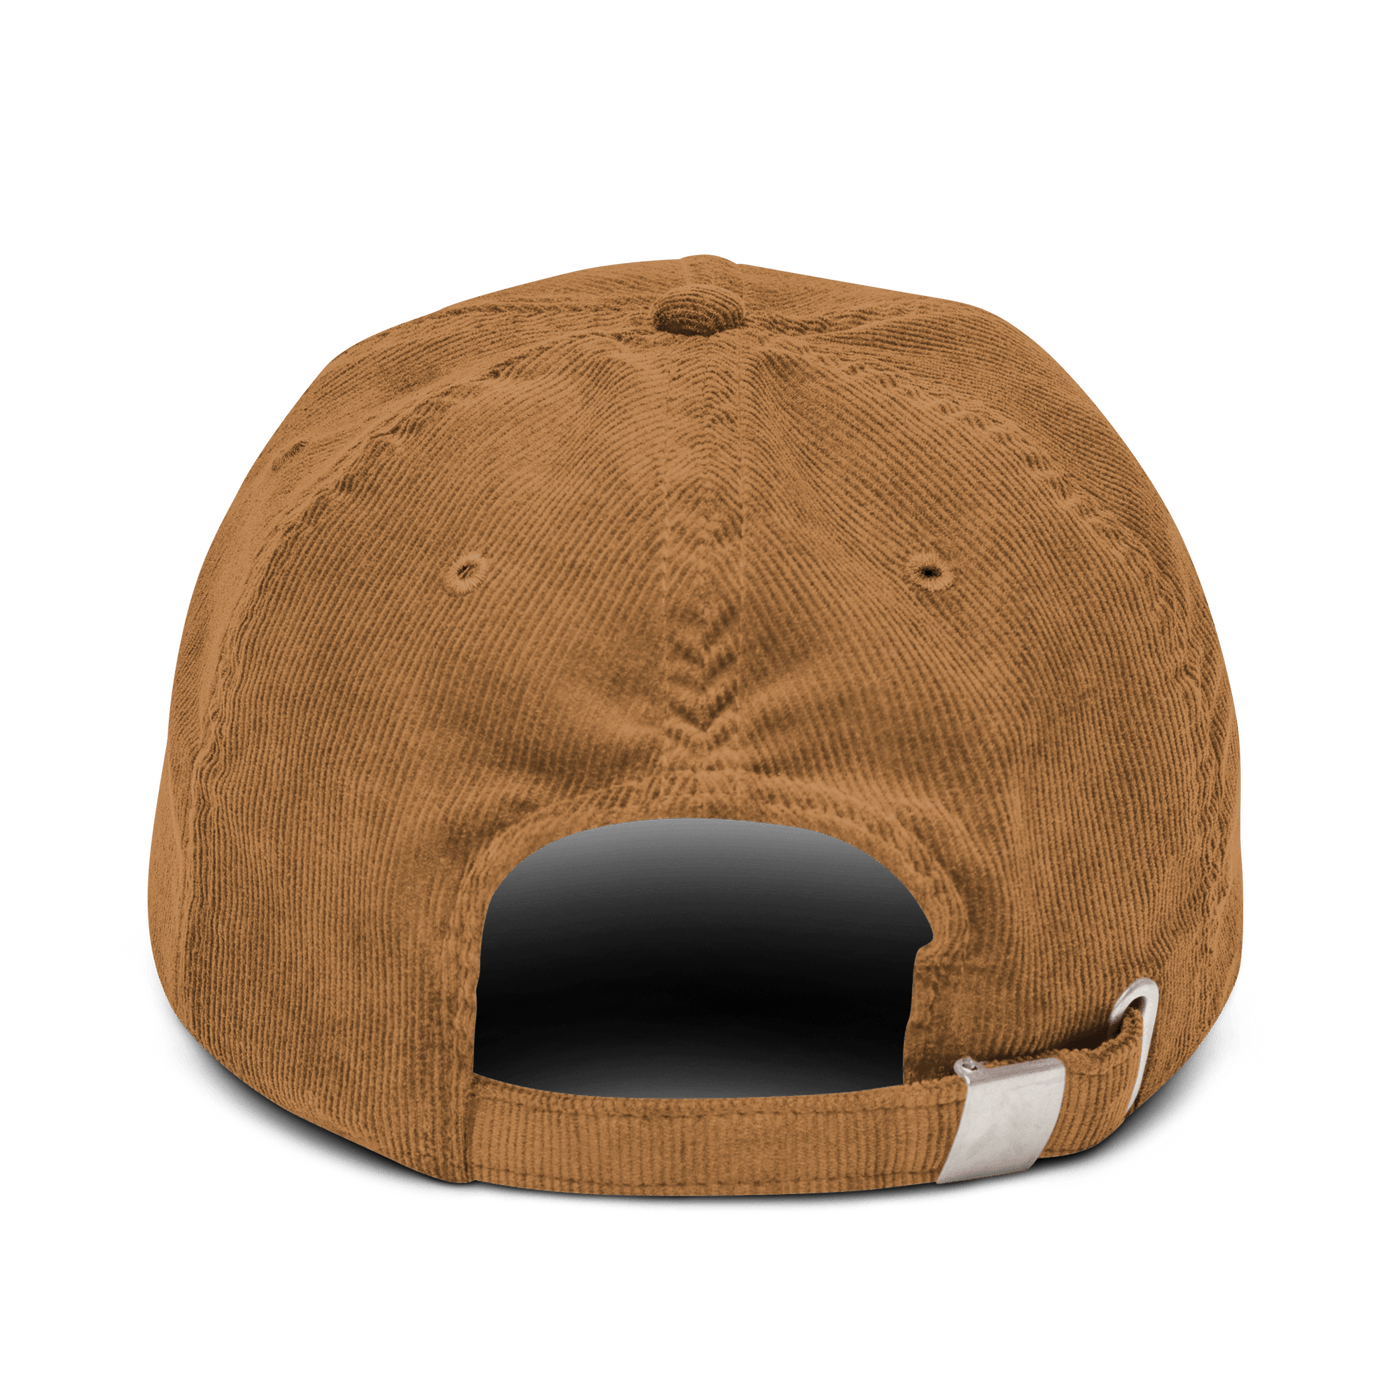 Stockholm Syndrome Corduroy hat - Camel - - Just Another Cap Store